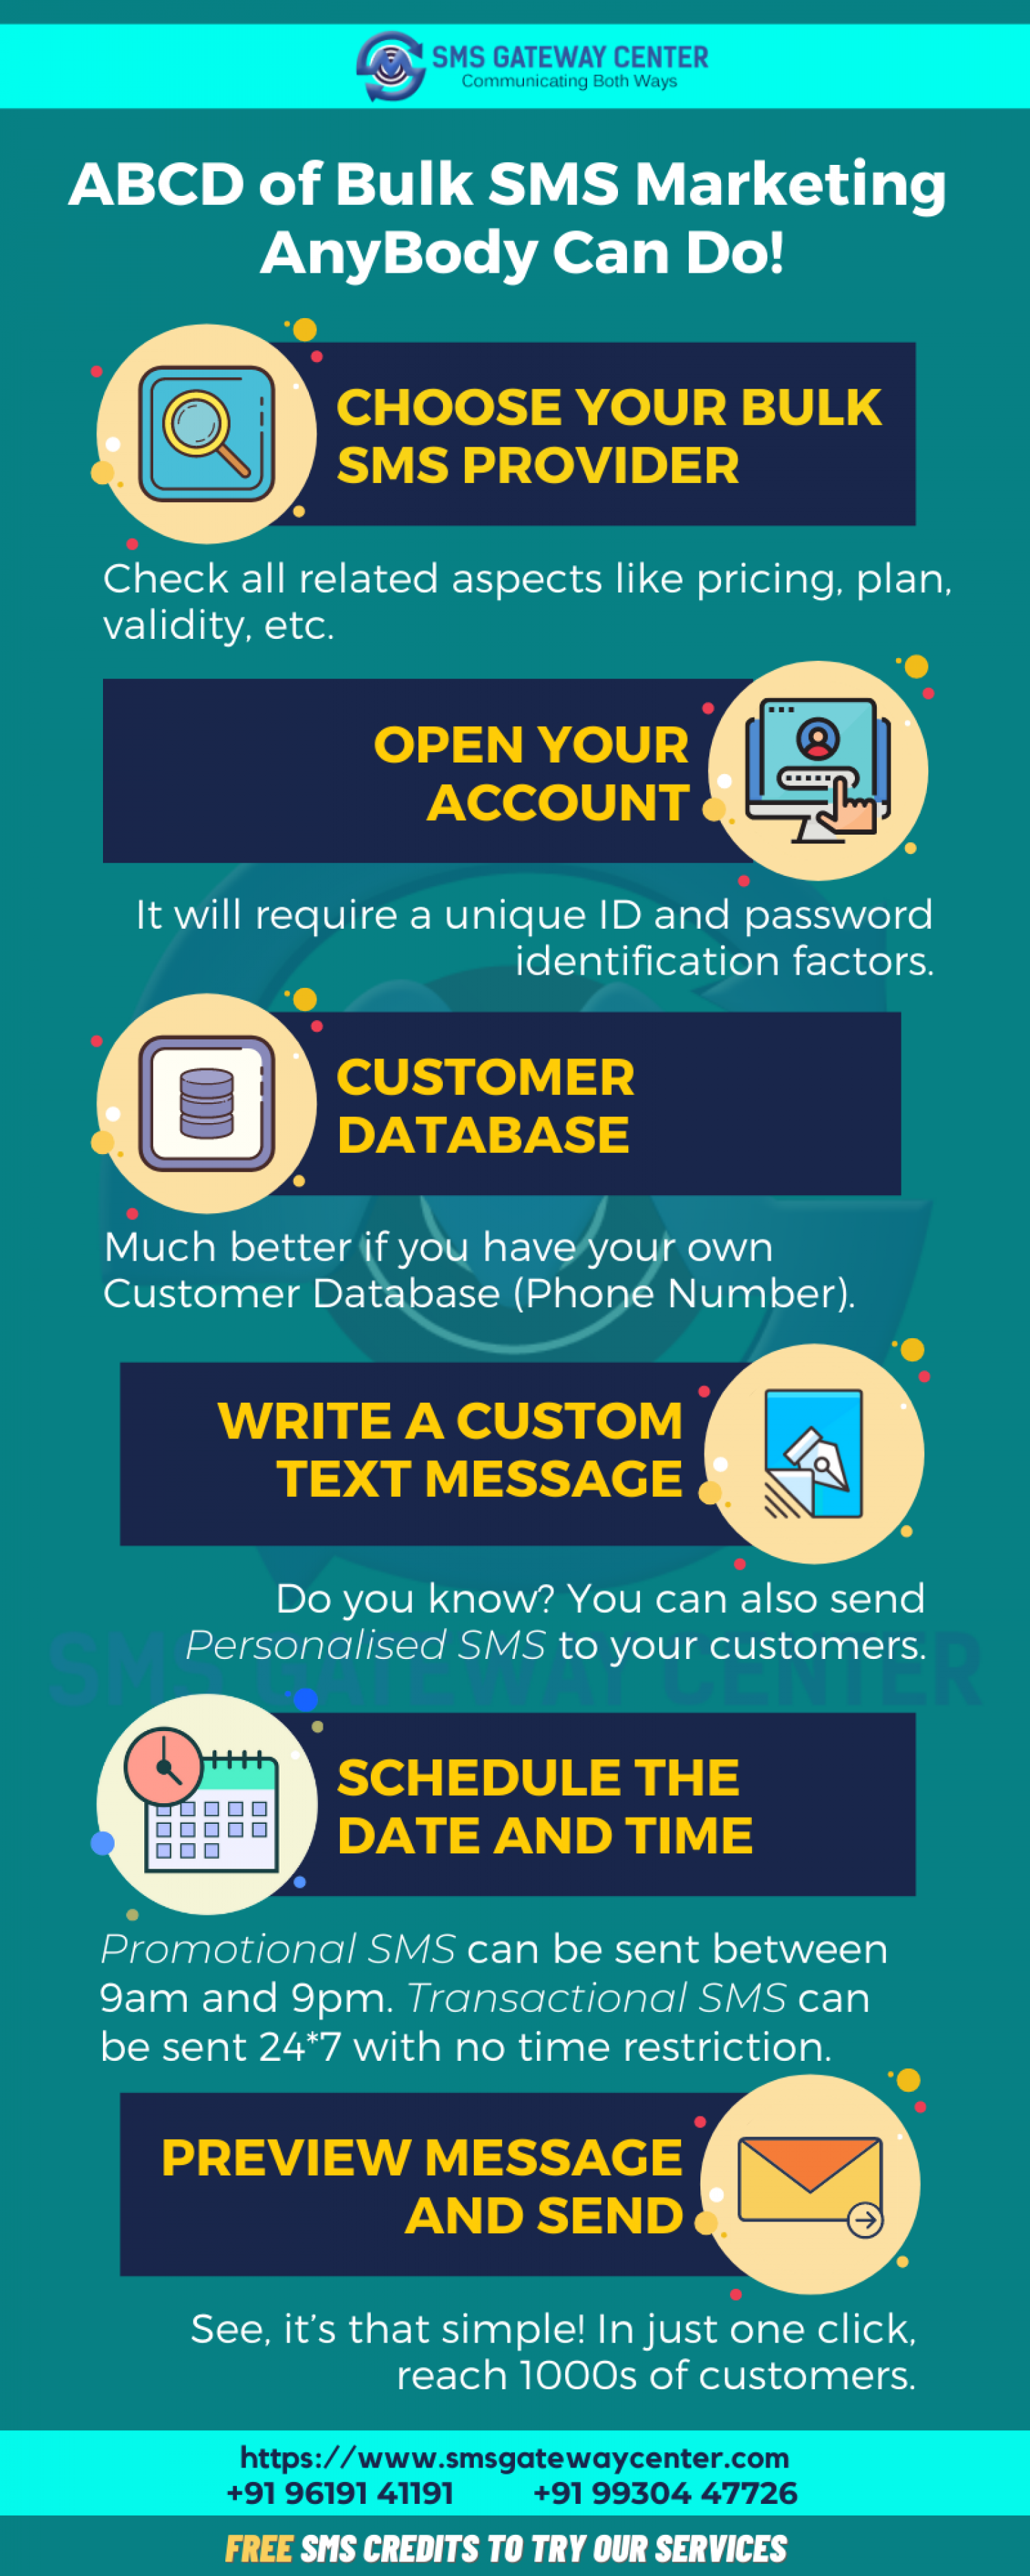 ABCD of Bulk SMS Marketing – AnyBody Can Do! Infographic